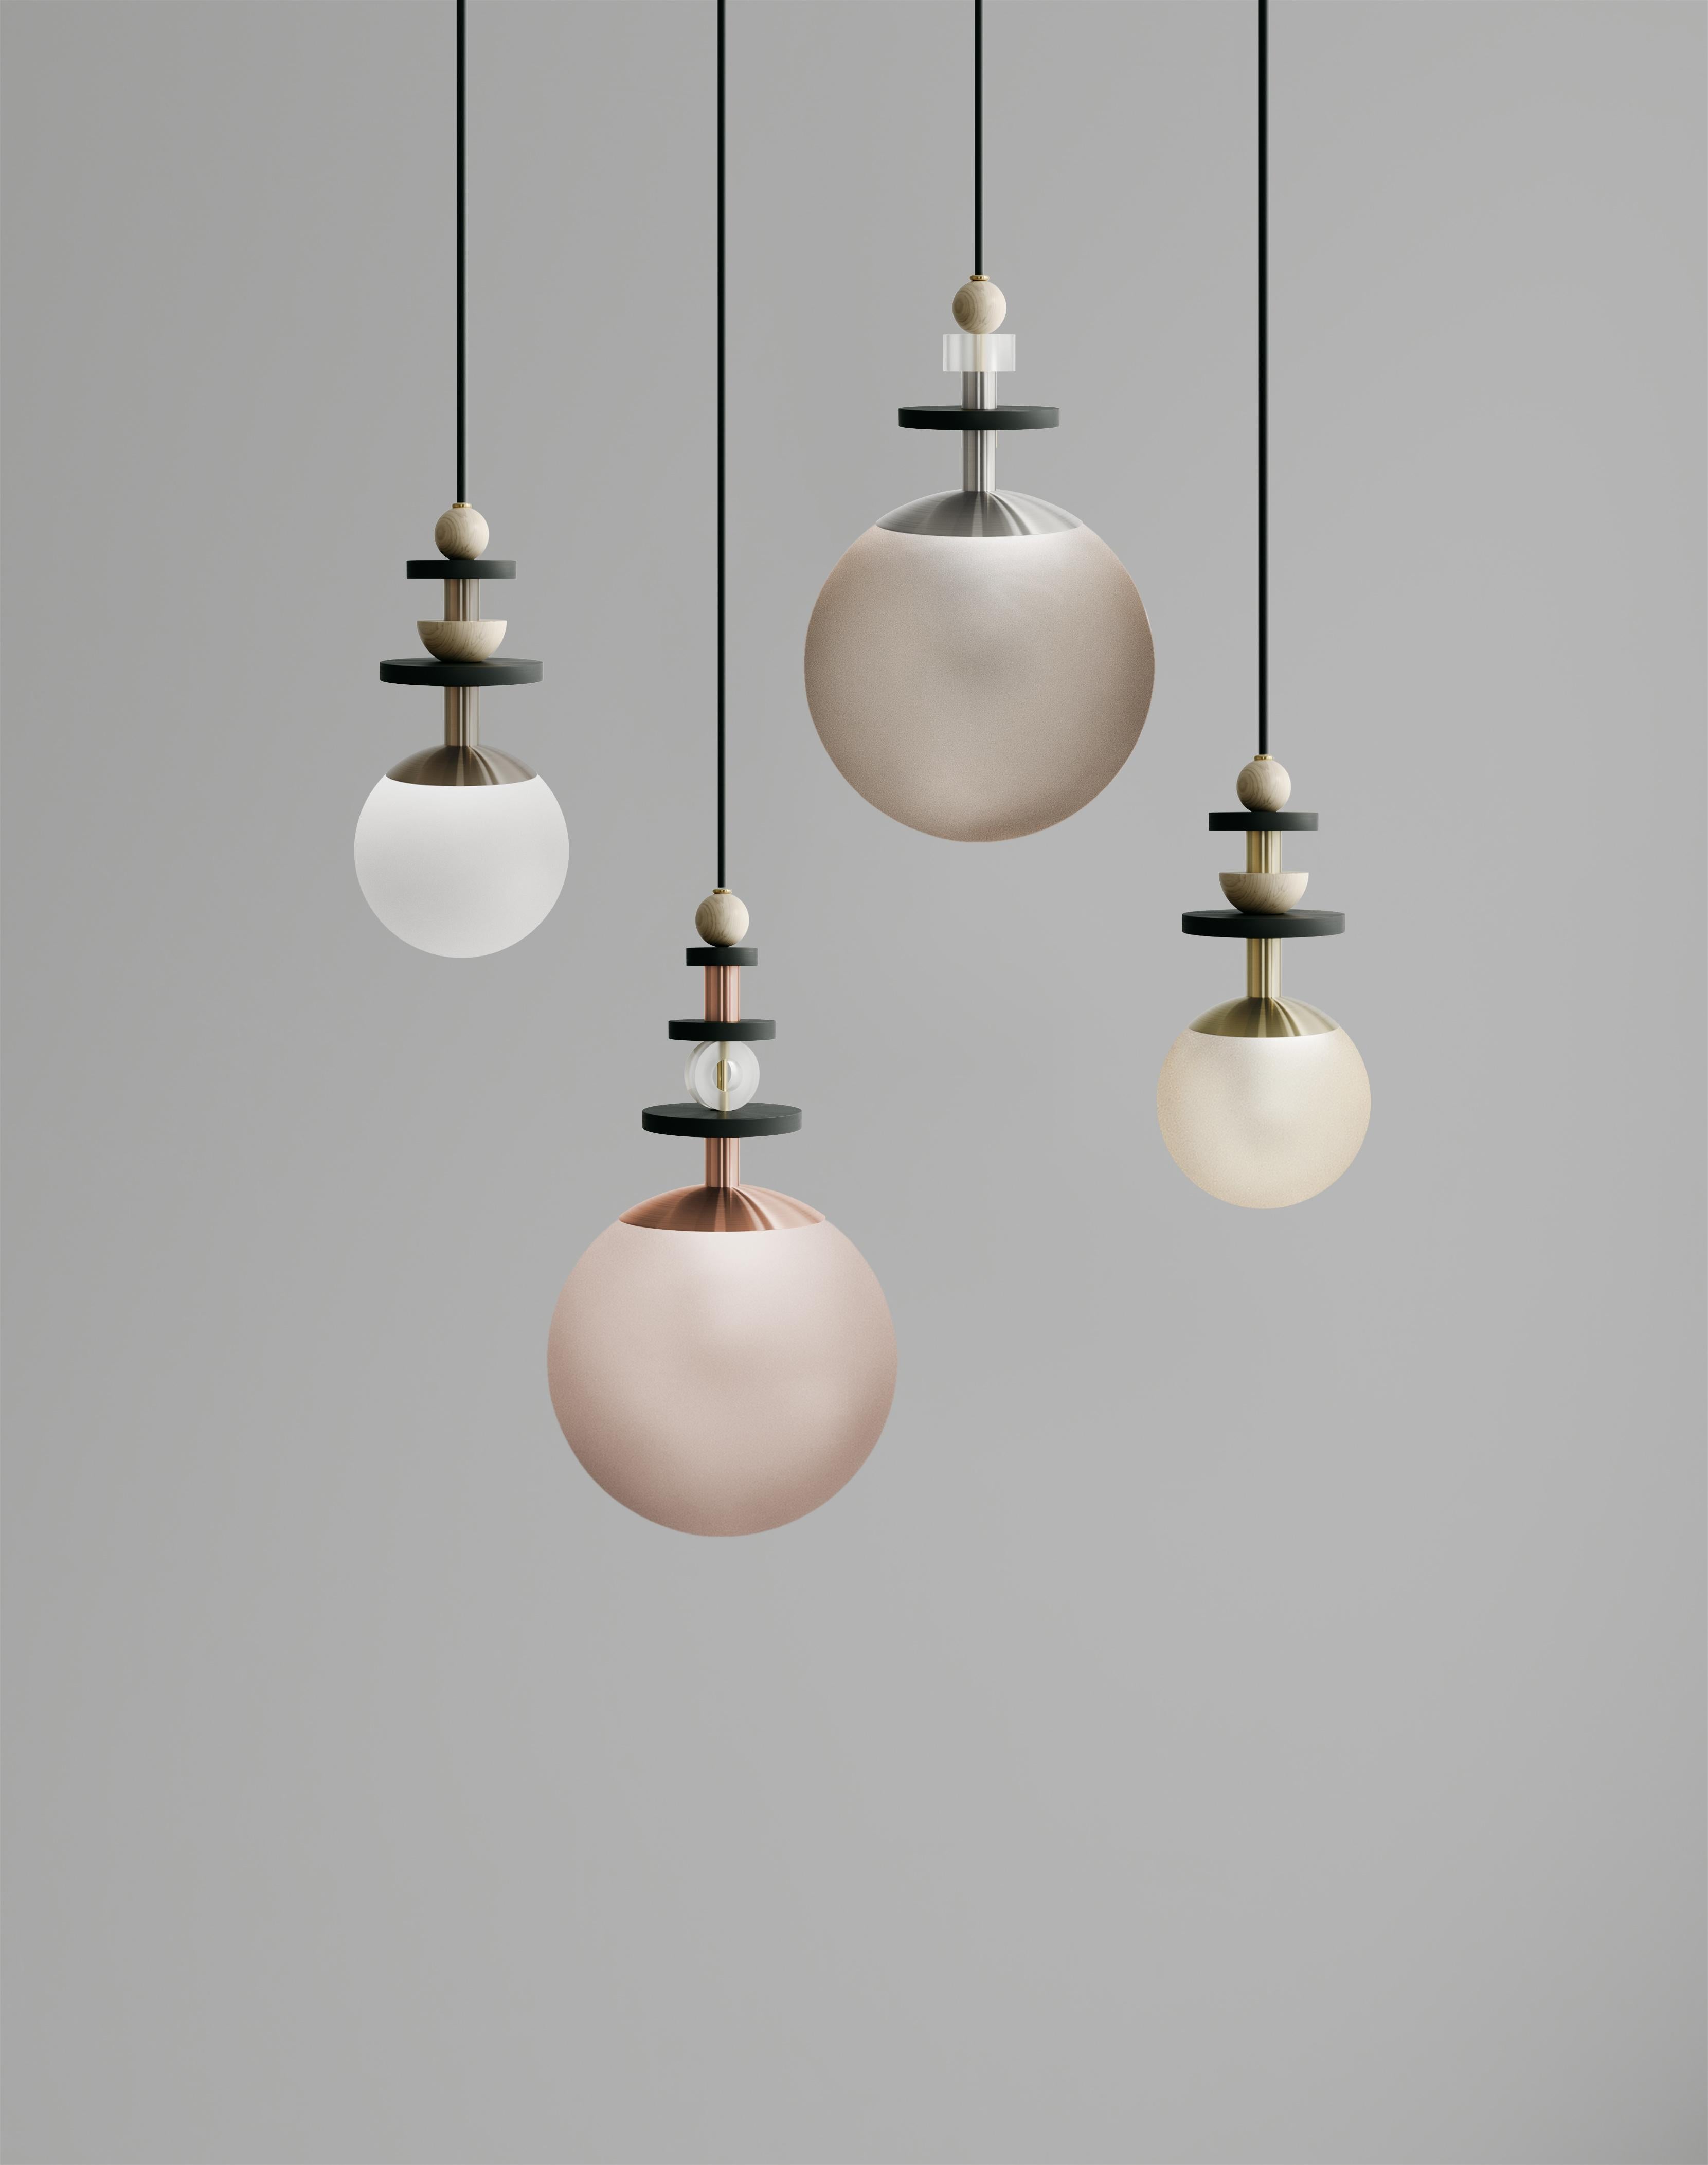 A collection of playful and versatile pendants that consider lighting as the 